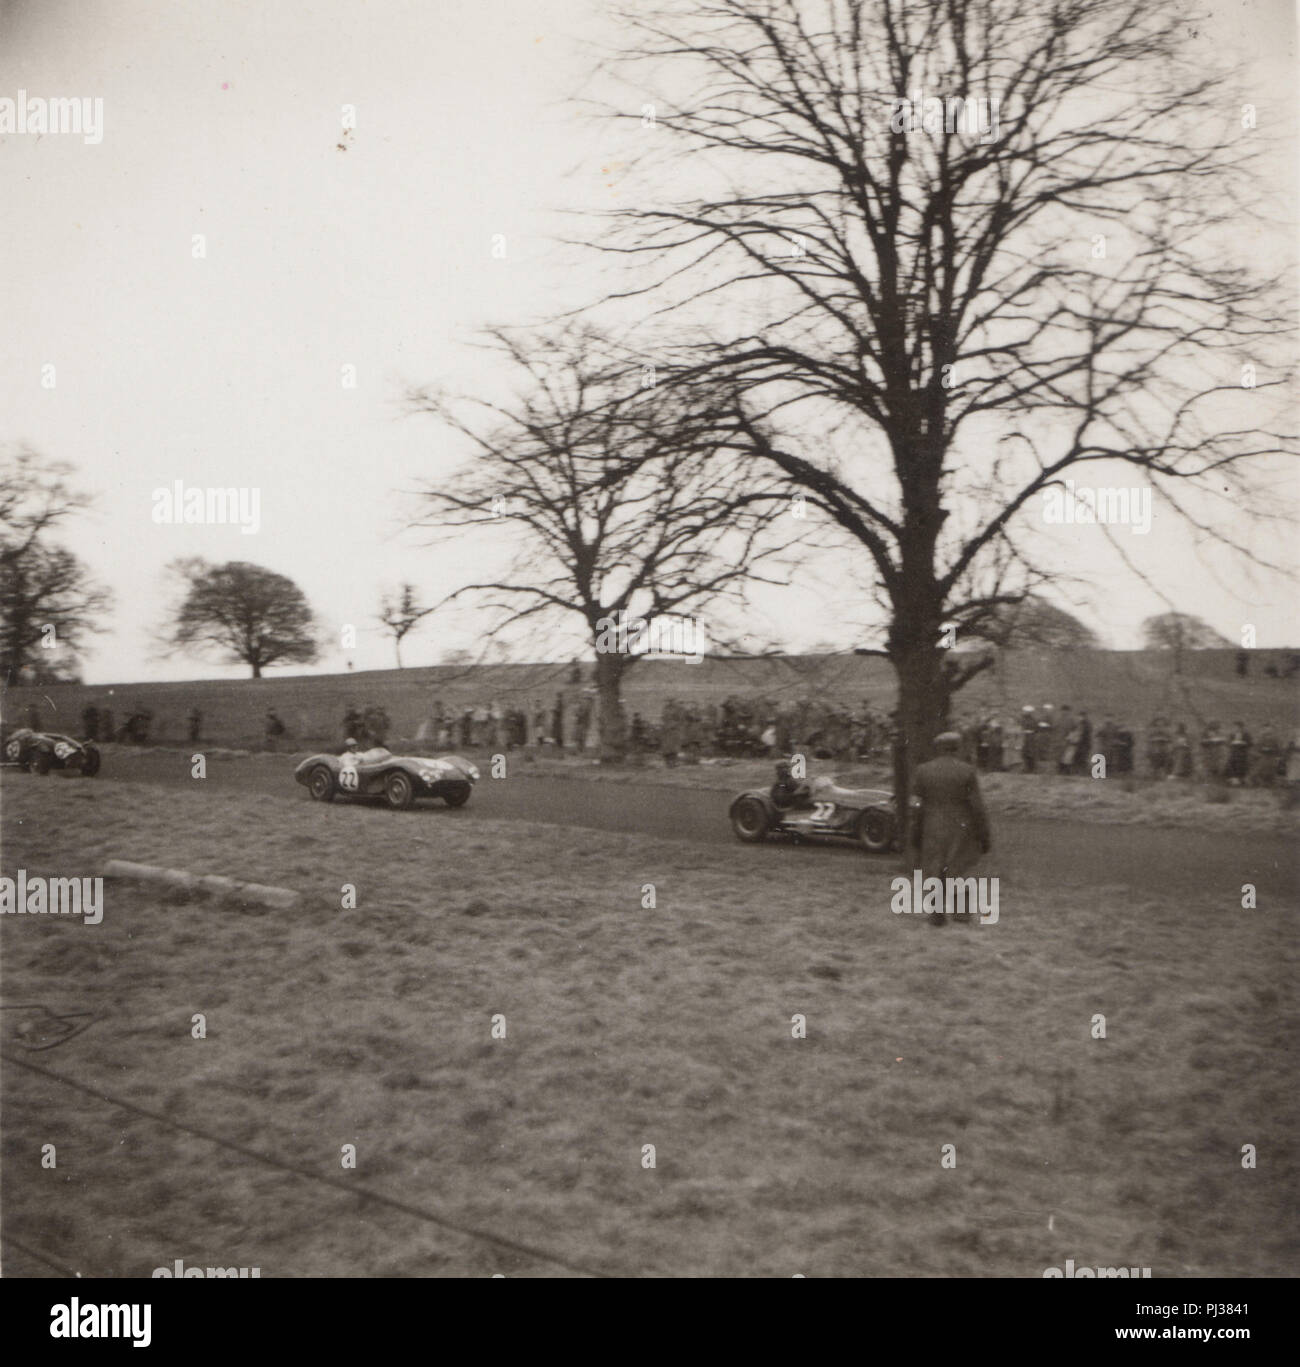 Vintage Photograph of British Motor Racing Cars With Spectators Lining The Roadside Stock Photo